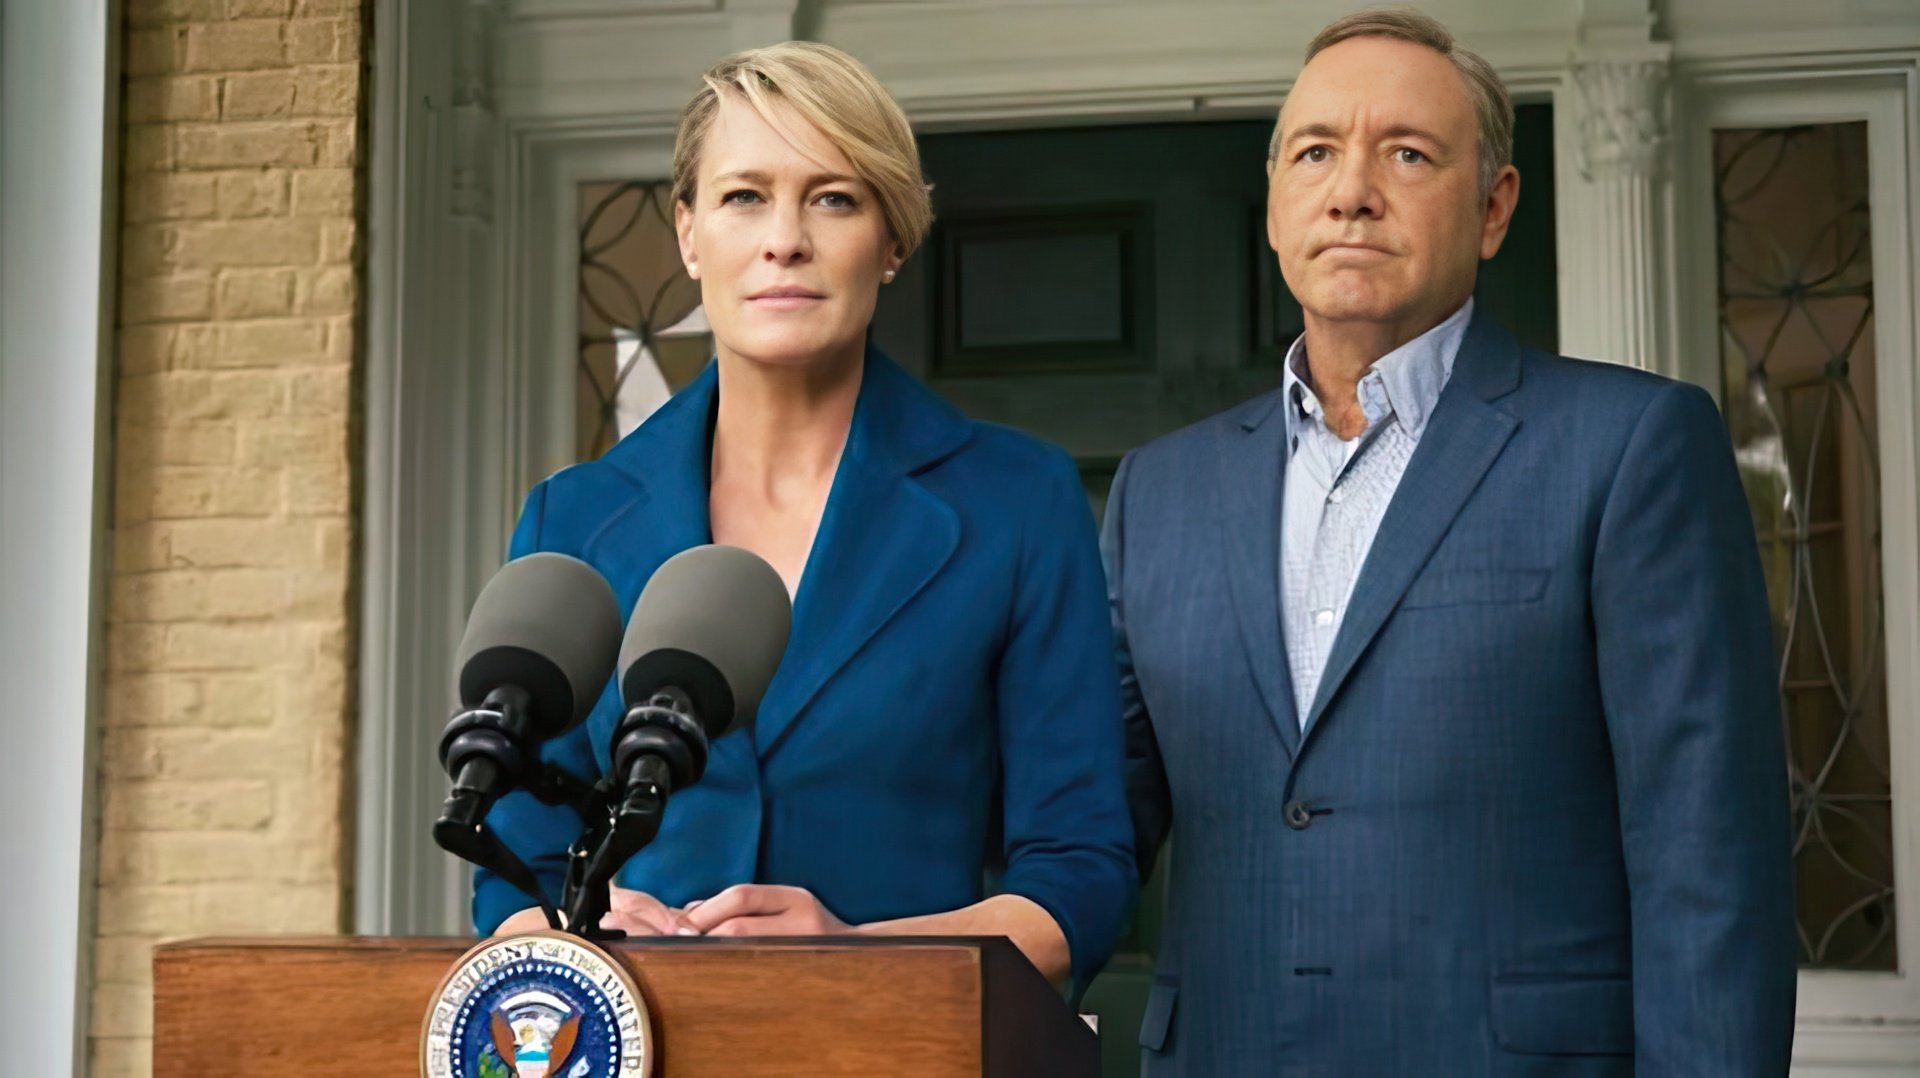 Robin Wright and Kevin Spacey in the House of Cards